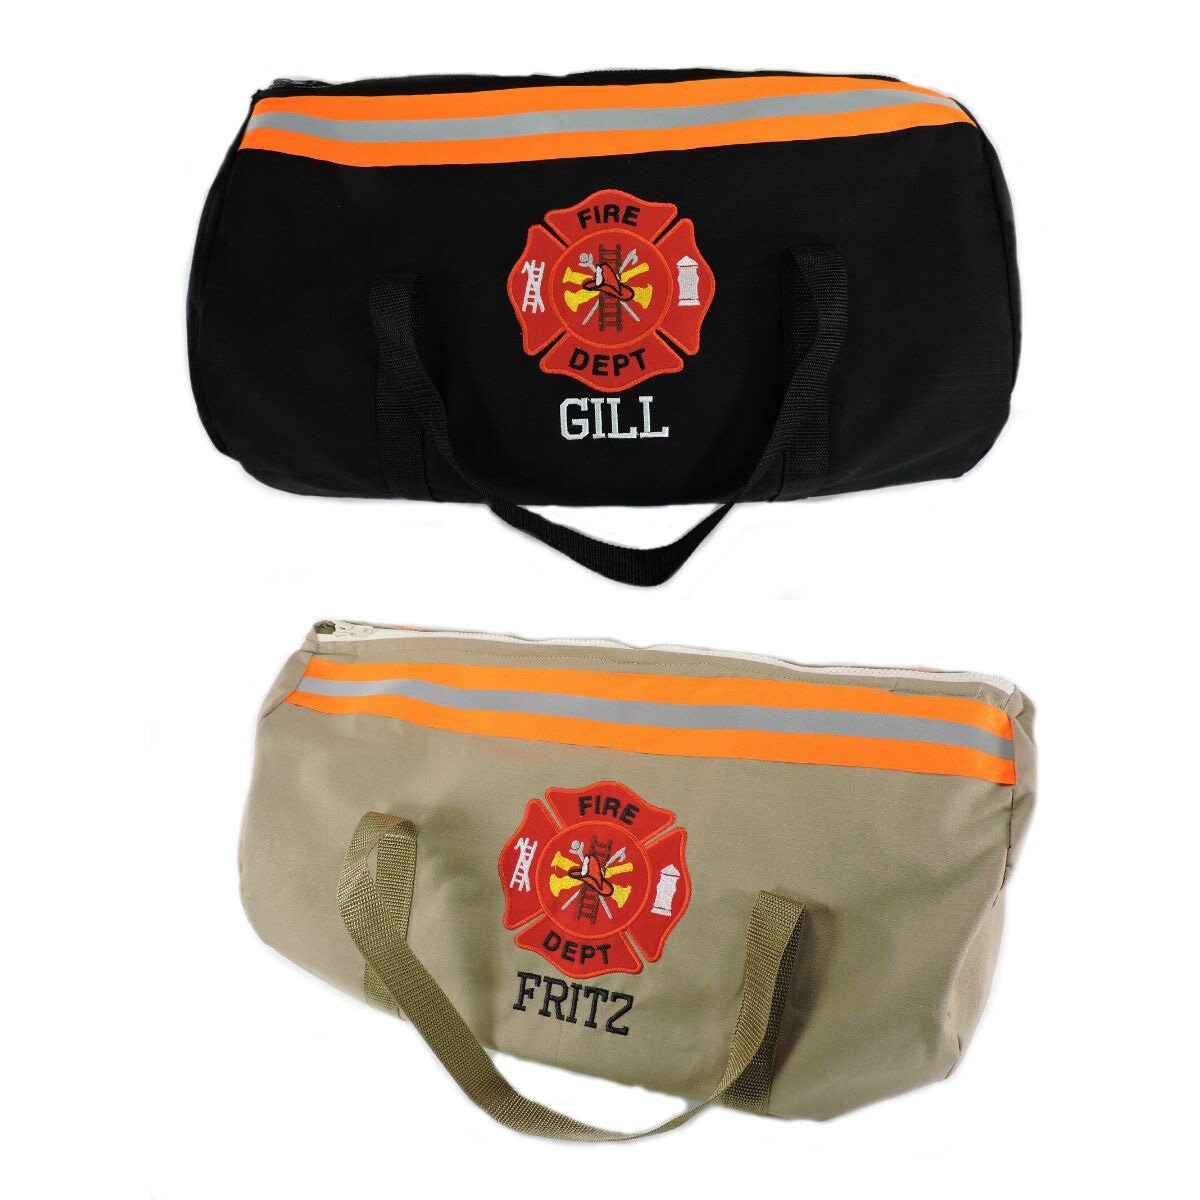 firefighter duffle bags with neon orange reflective tape